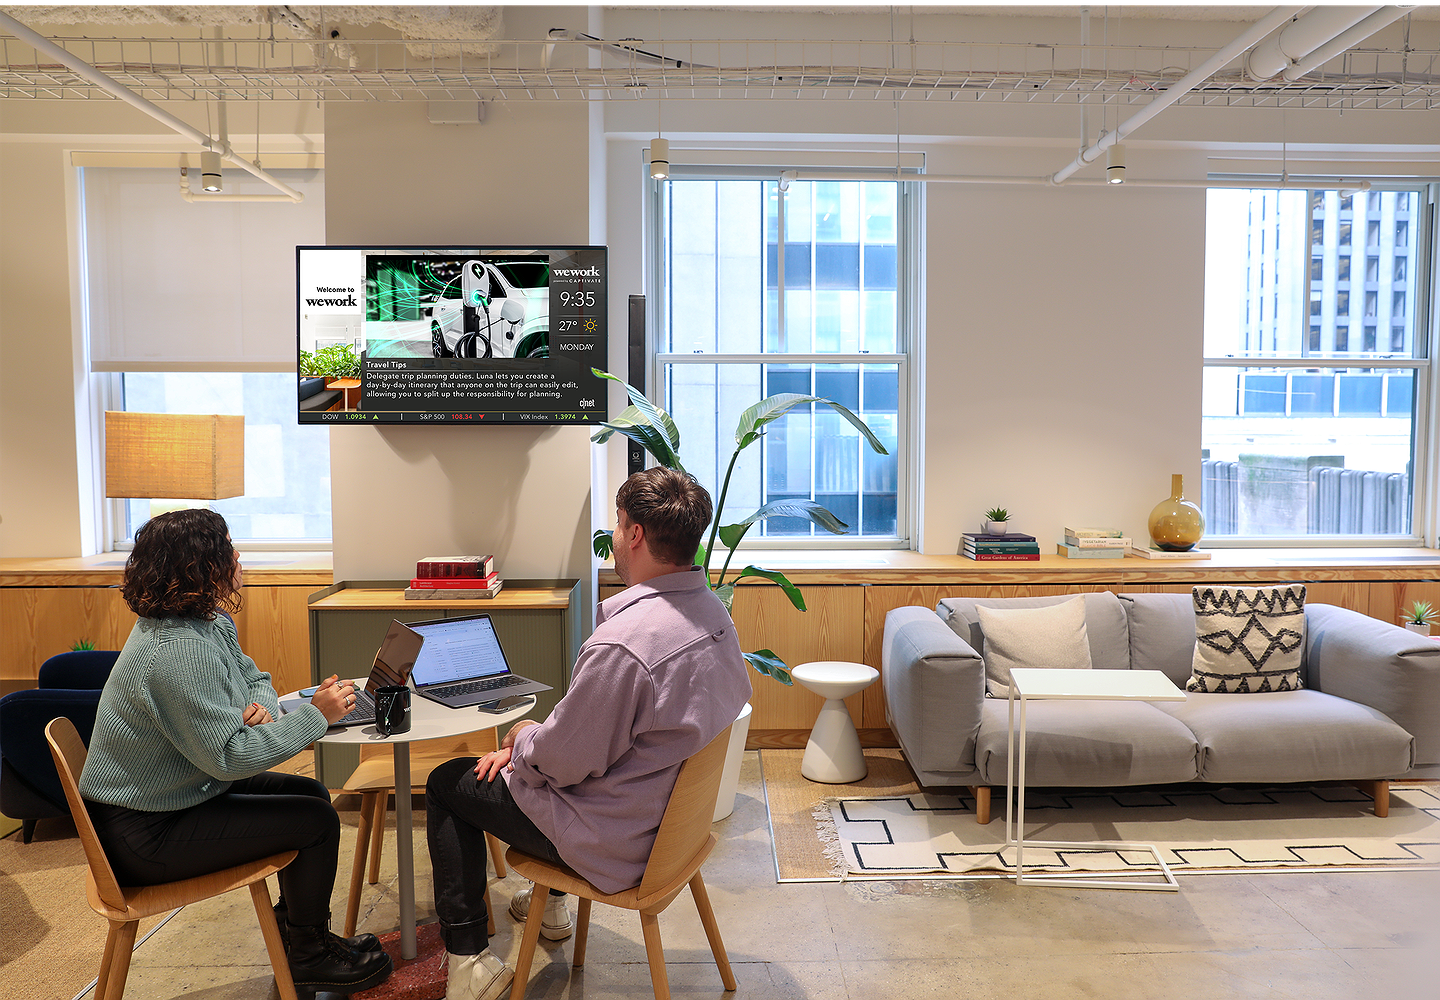 Contextual Advertising and Today’s Flexible Workspaces are the Perfect Pairing